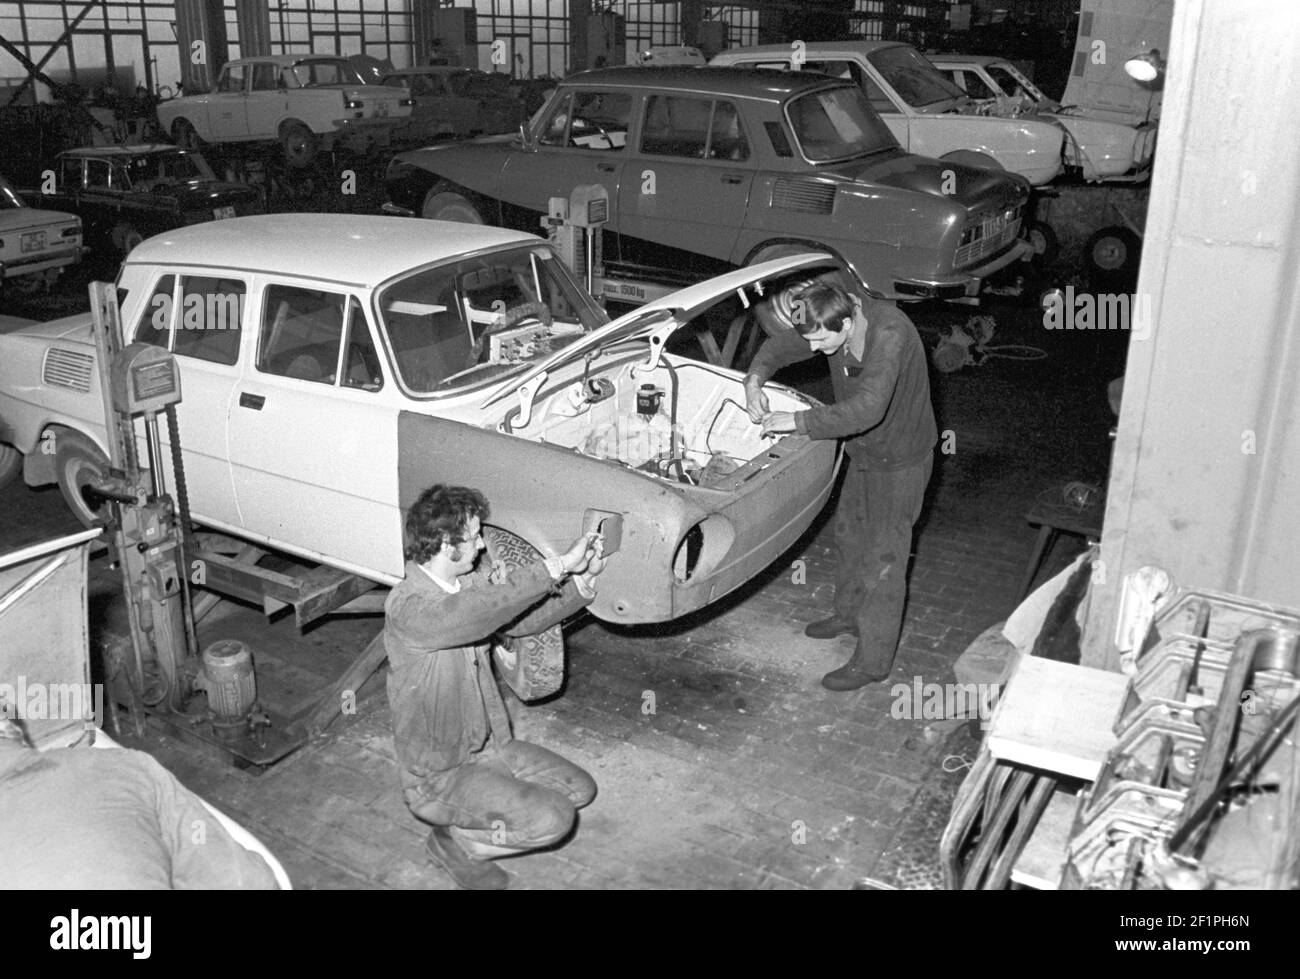 30 November 1981, Saxony, Delitzsch: Vehicles of the type Skoda S 100 are prepared for the painting of new parts by car locksmiths and painters at the PGH KFZ Delitzsch in the early 1980s. Exact date of recording not known. Photo: Volkmar Heinz/dpa-Zentralbild/ZB Stock Photo